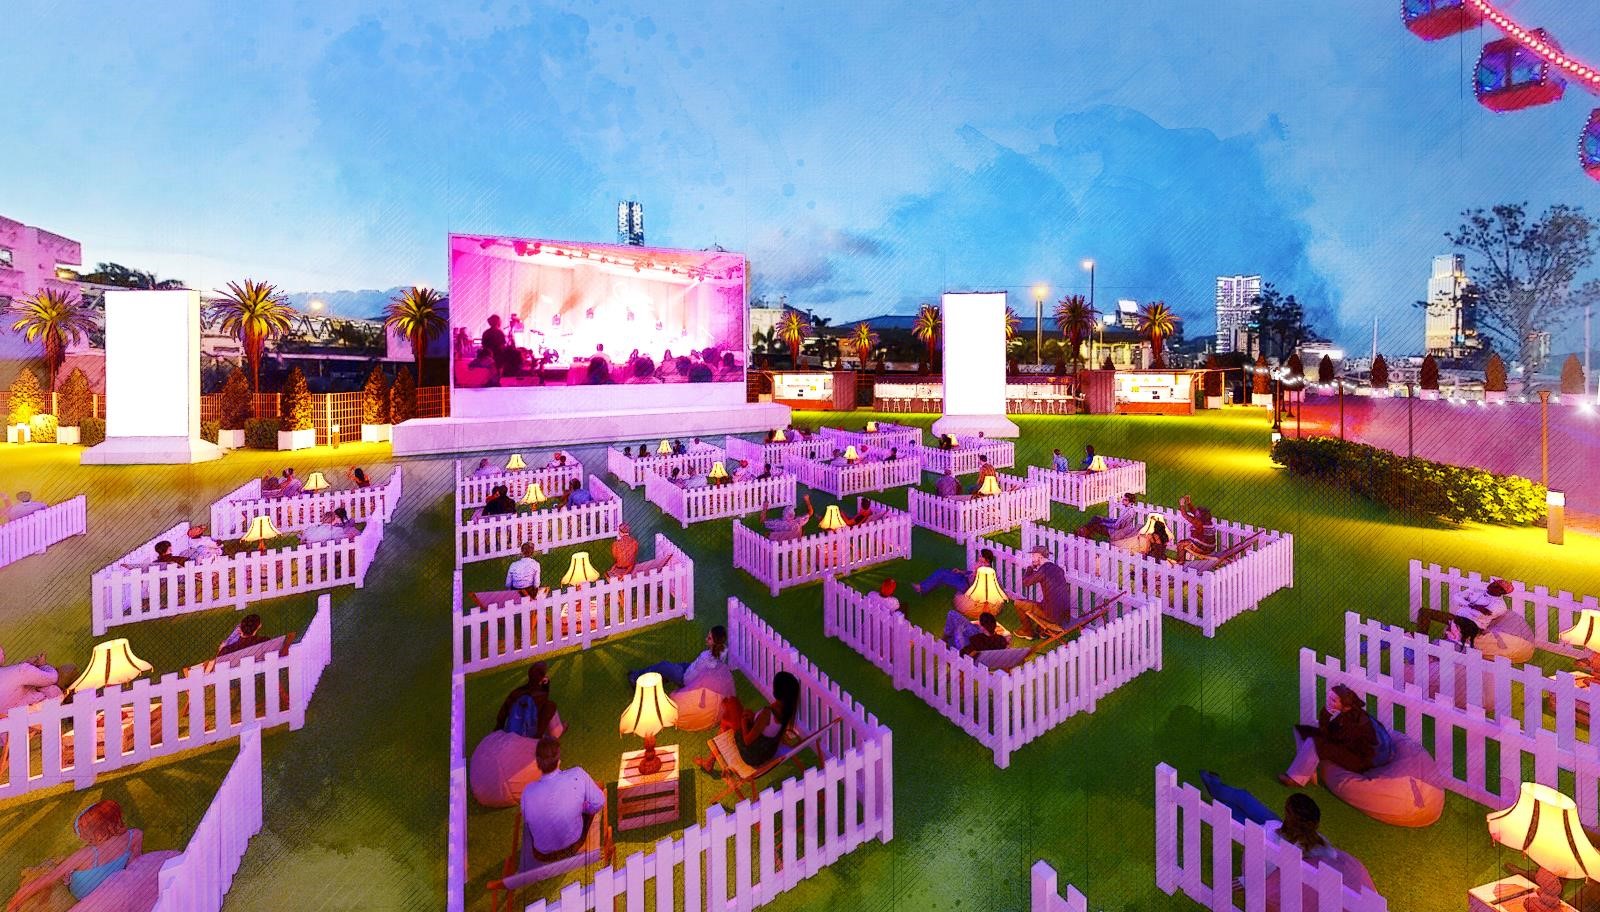 The Grounds offers events from fitness sessions to movie screenings in a socially distanced space at the Central Harborfront. Photo via The Grounds